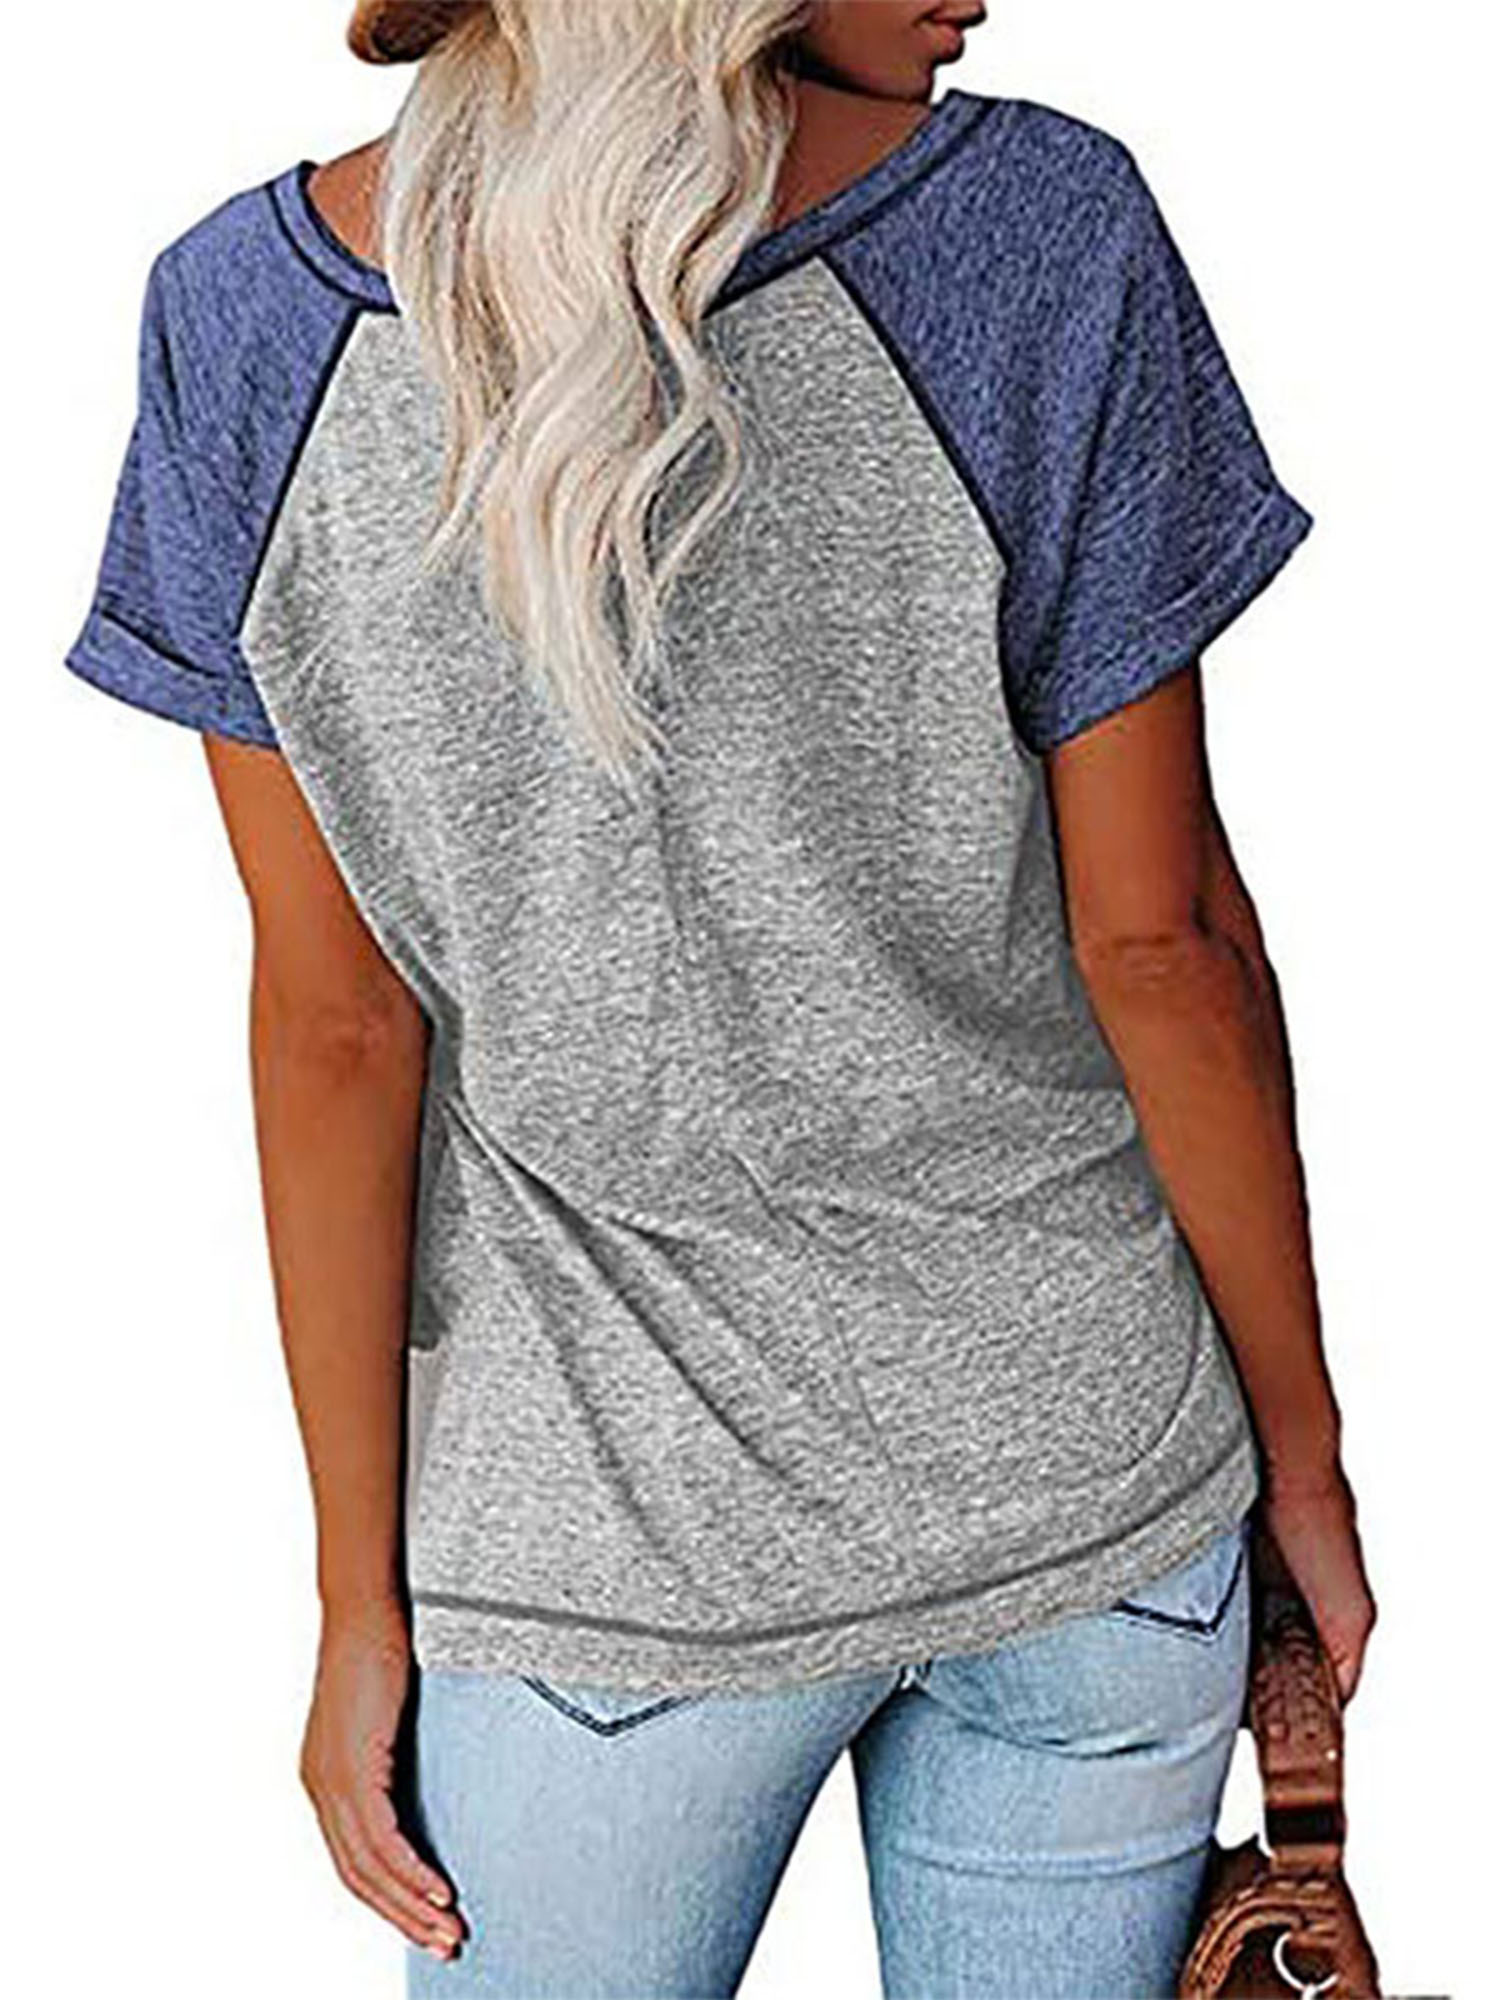 Women Ladies Casual Tops Short Sleeve Color Block T-shirt V Neck Tunic Blouse Tee Ladies Stylish Sport Athletic Tops - image 3 of 3